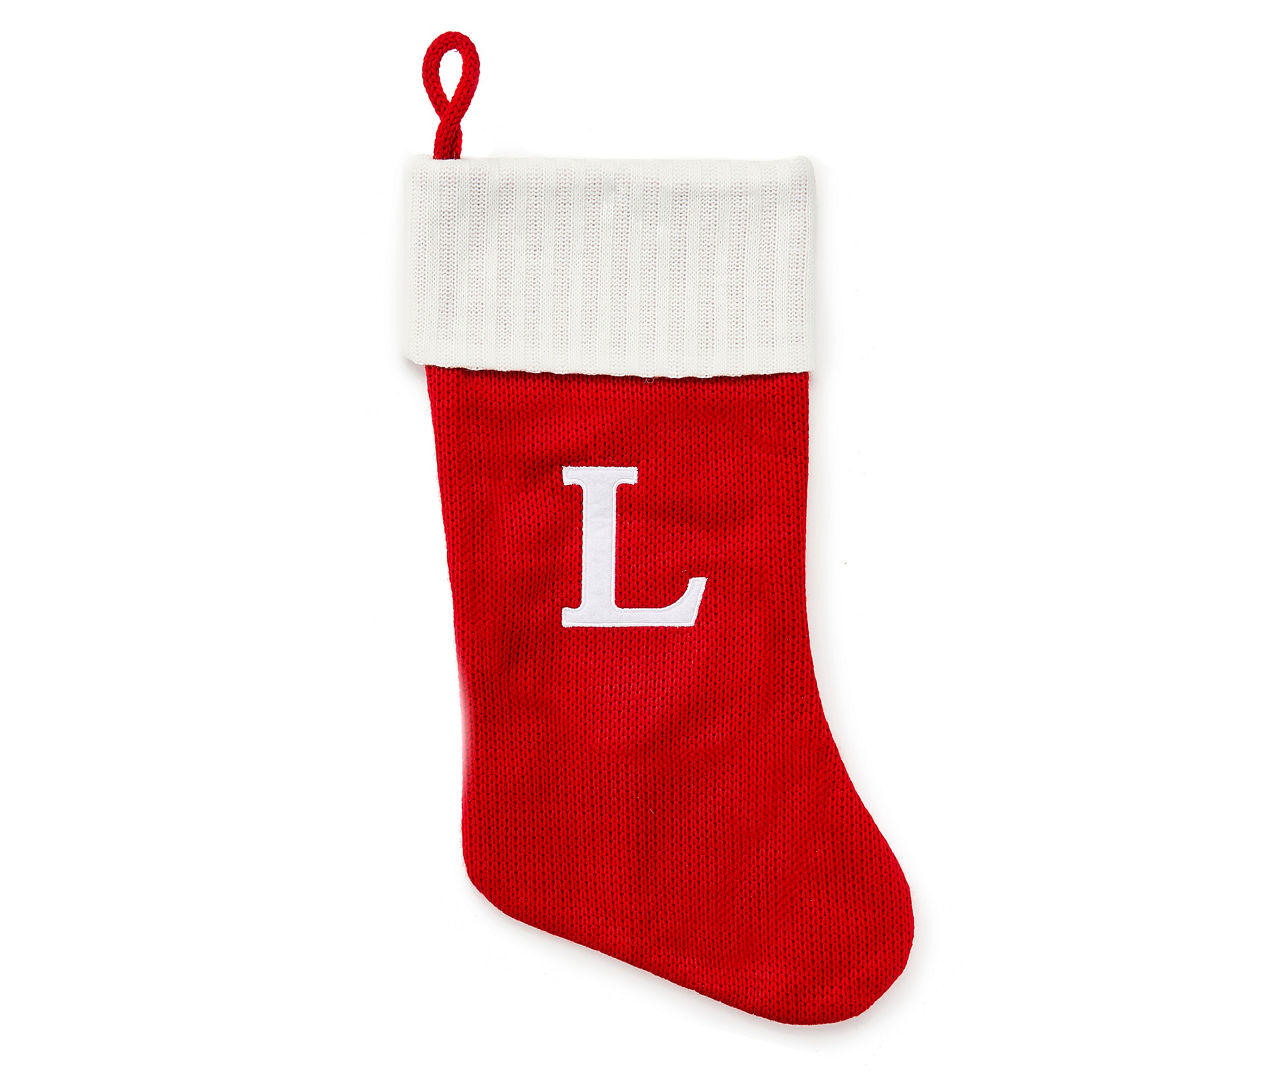 "L" Monogram Red Knit Stocking with White Trim